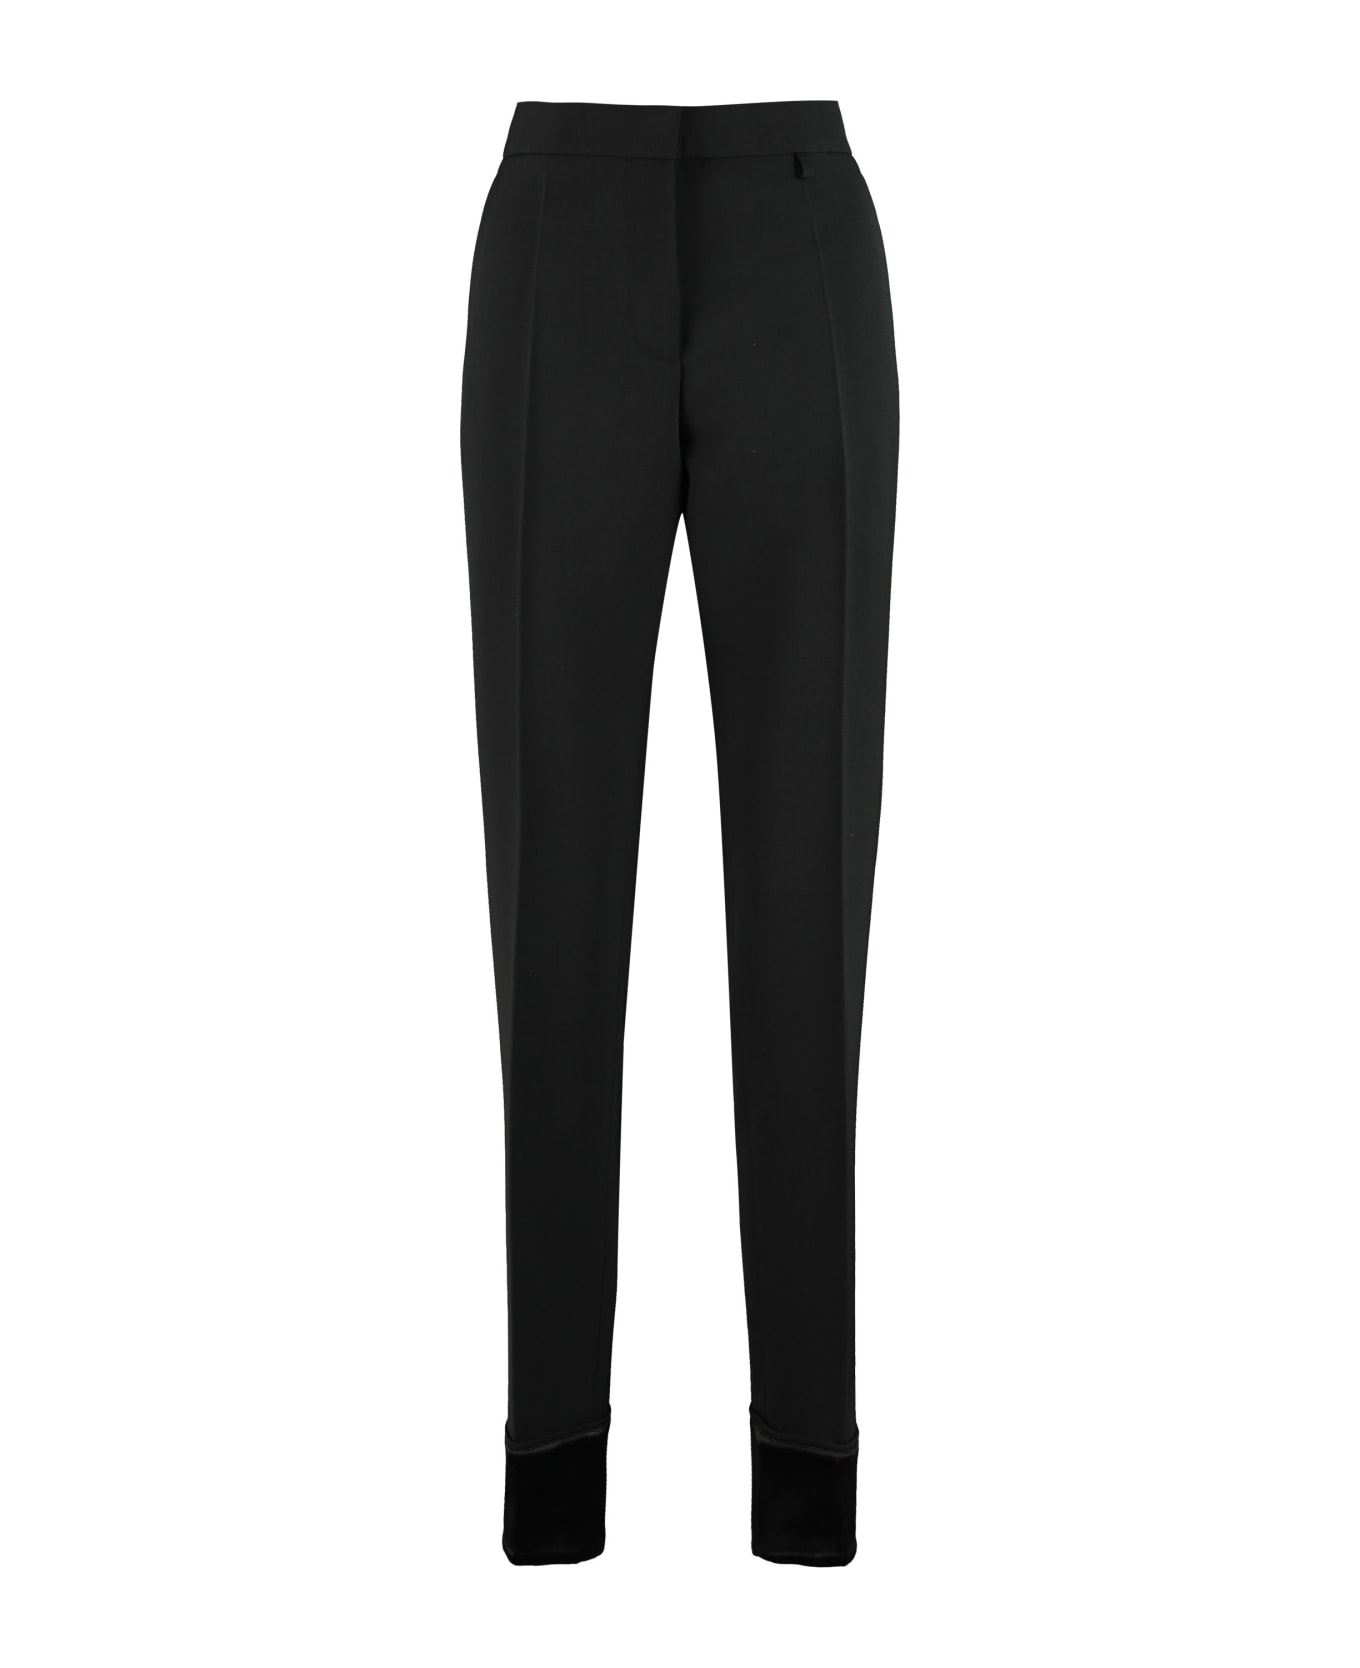 Givenchy Wool Tailored Trousers - black ボトムス